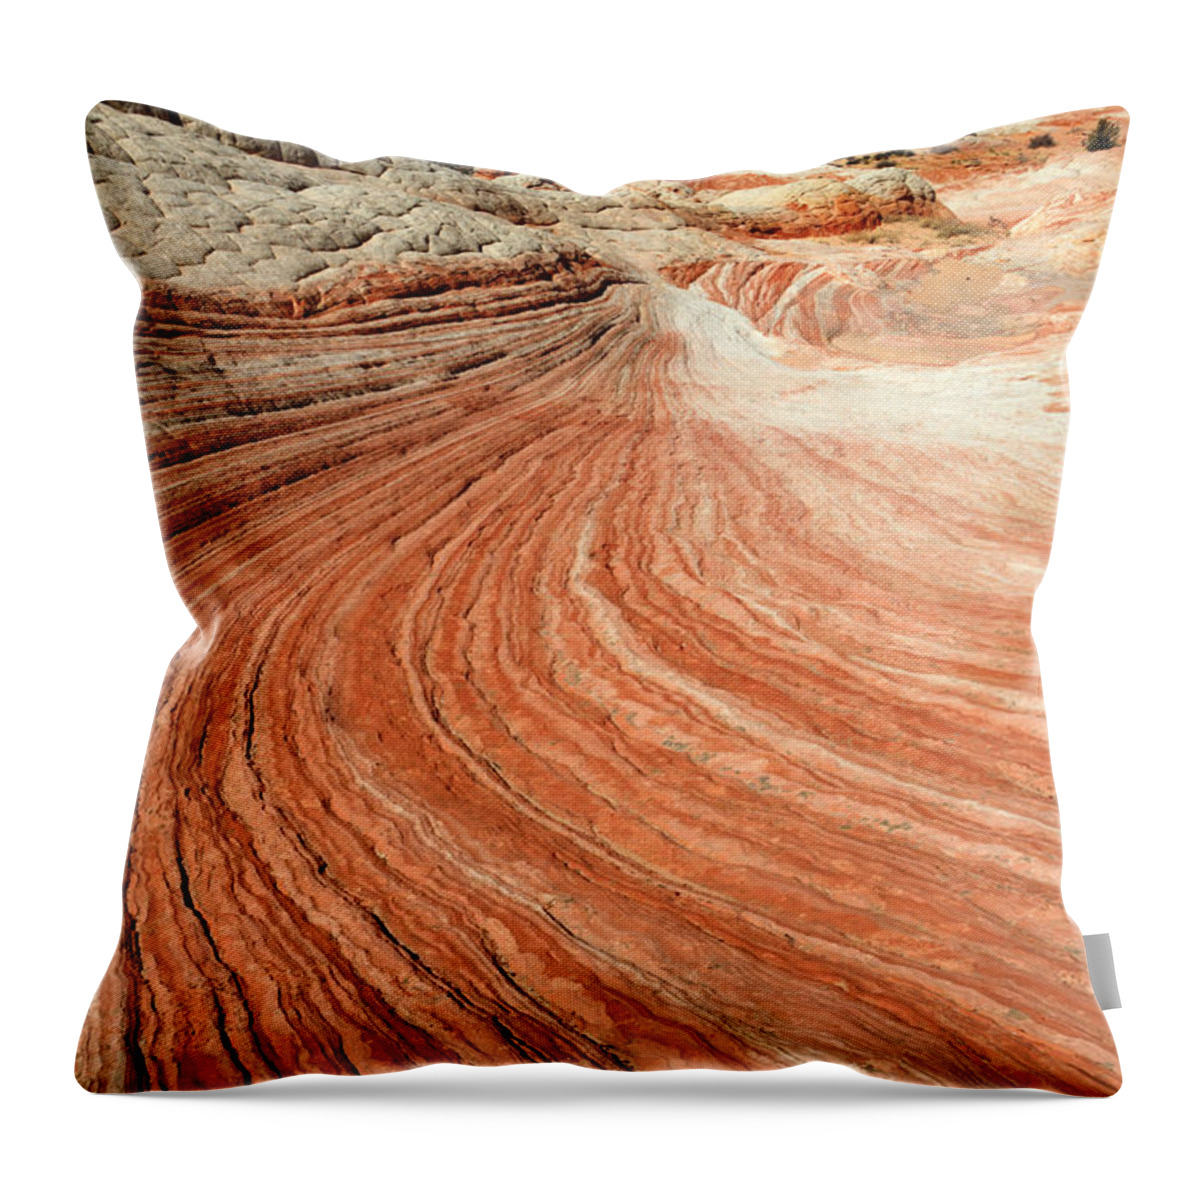 White Pocket Throw Pillow featuring the photograph The Brilliance Of Nature 3 by Bob Christopher